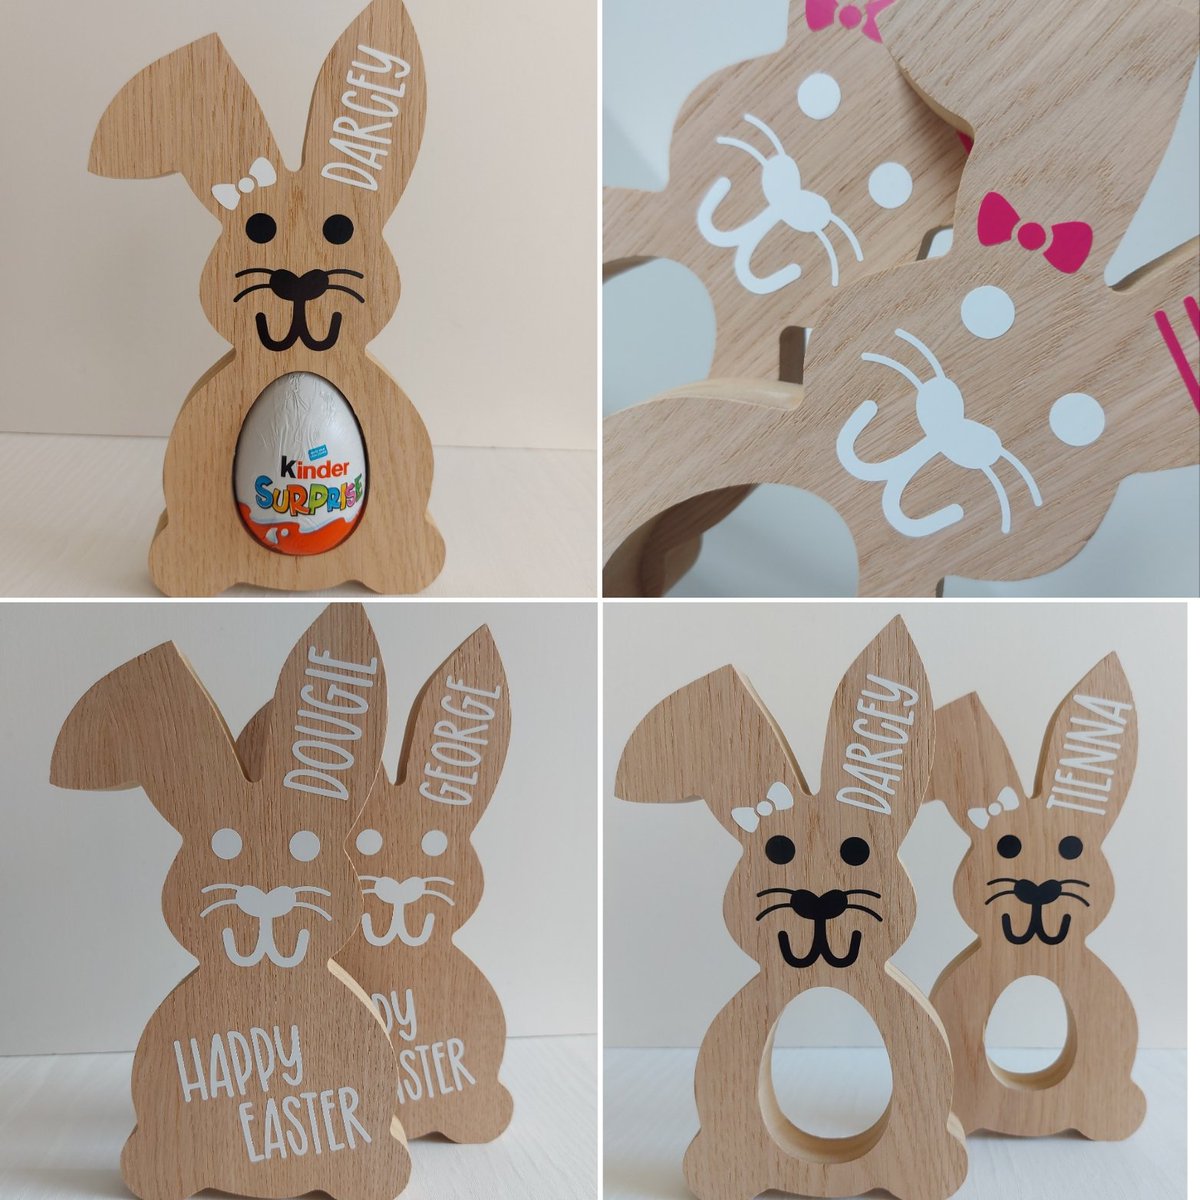 Grab your Easter Bunnies in time for Easter! 🐰 Available with Happy Easter on belly or with a egg hole...kinder egg or creme egg. £10.00 without the egg hole. £12.00 with the egg hole, egg of choice is included. £4.00 P&P Order yours directly through myself or via my Etsy.